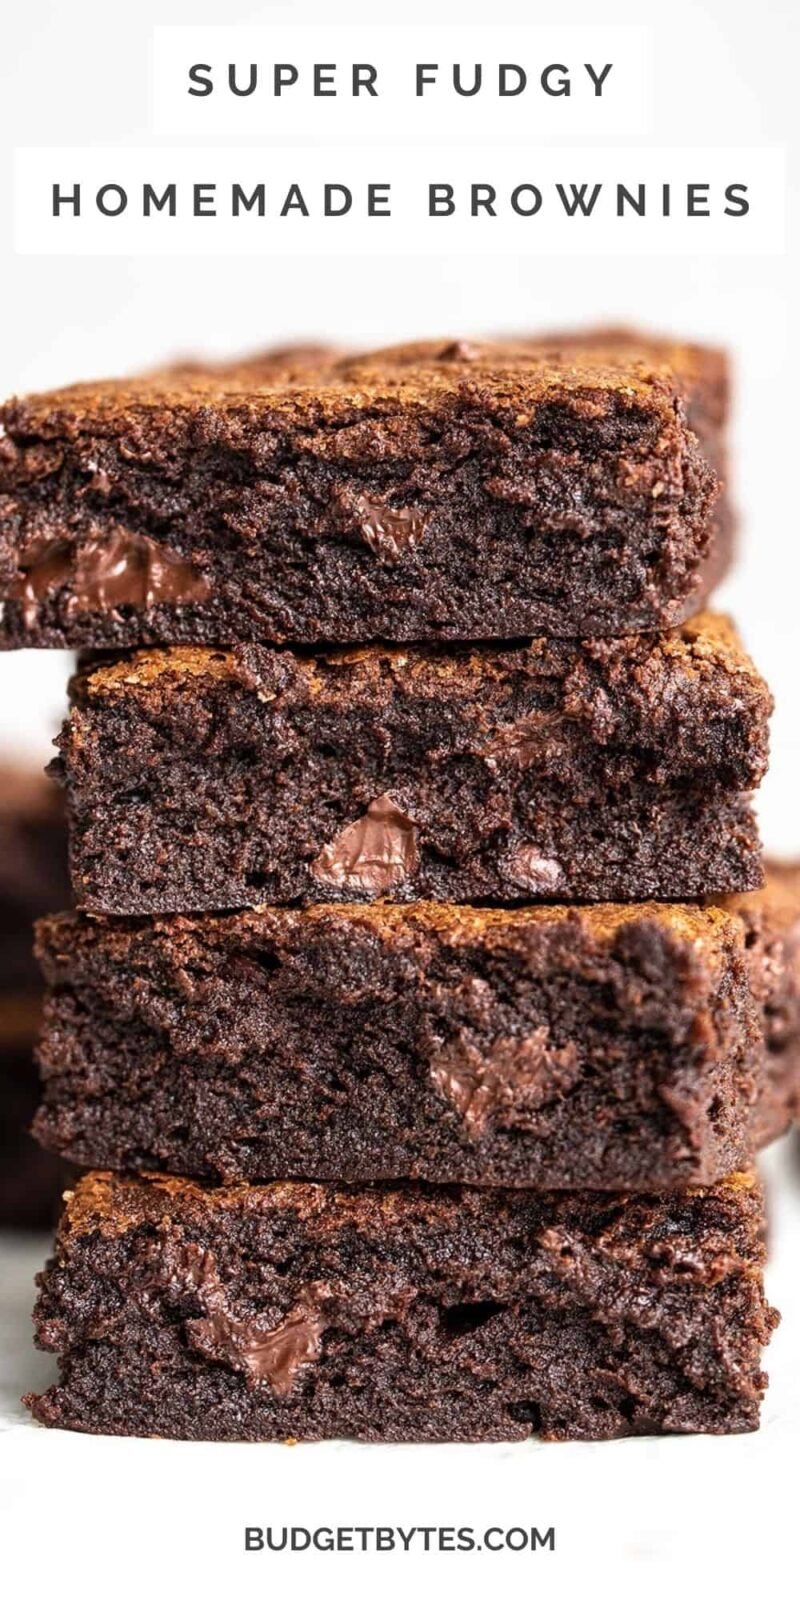 A stack of homemade brownies with title text at the top.